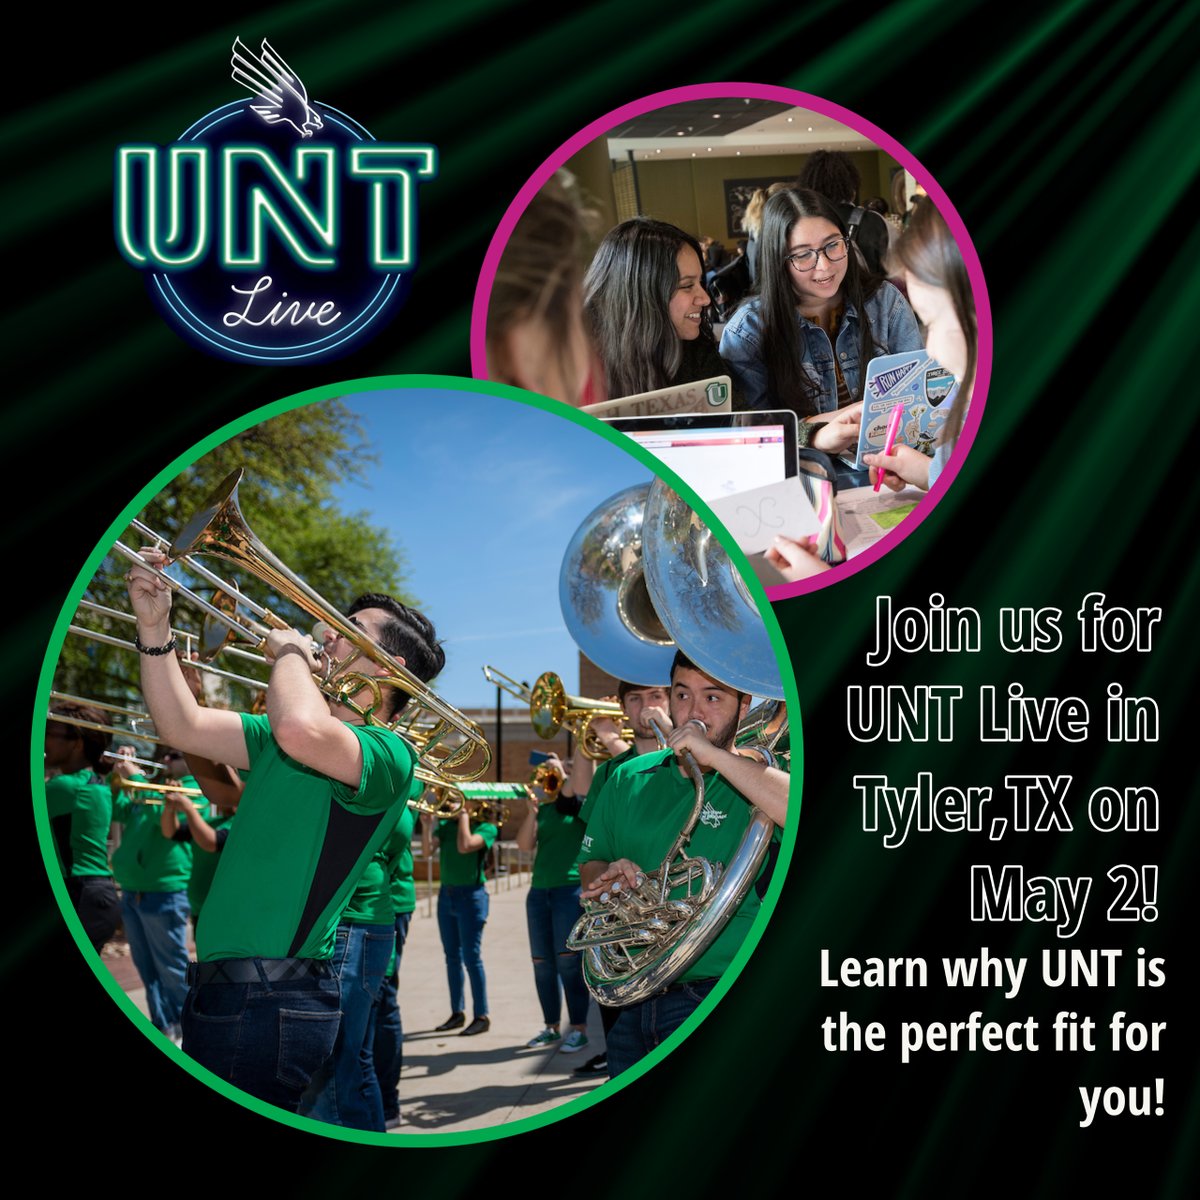 Tyler students - UNT Live is coming to your city on May 2! Link in bio to learn more and register! #MeanGreen #UNT #FutureEagles